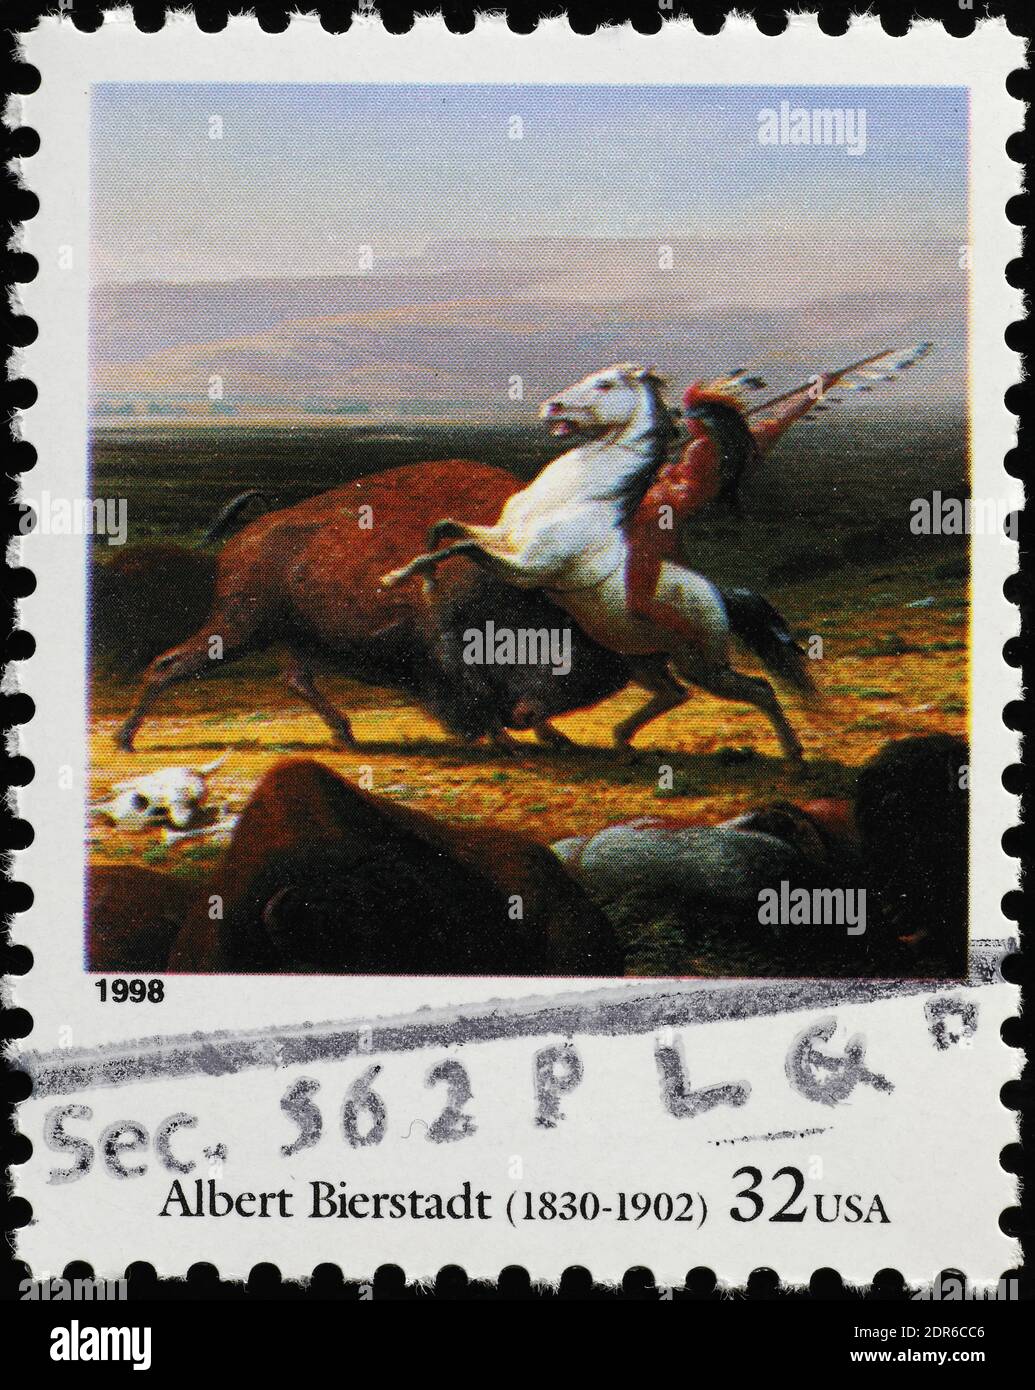 The Last of the Buffalo by Albert Bierstadt on american stamp Stock Photo